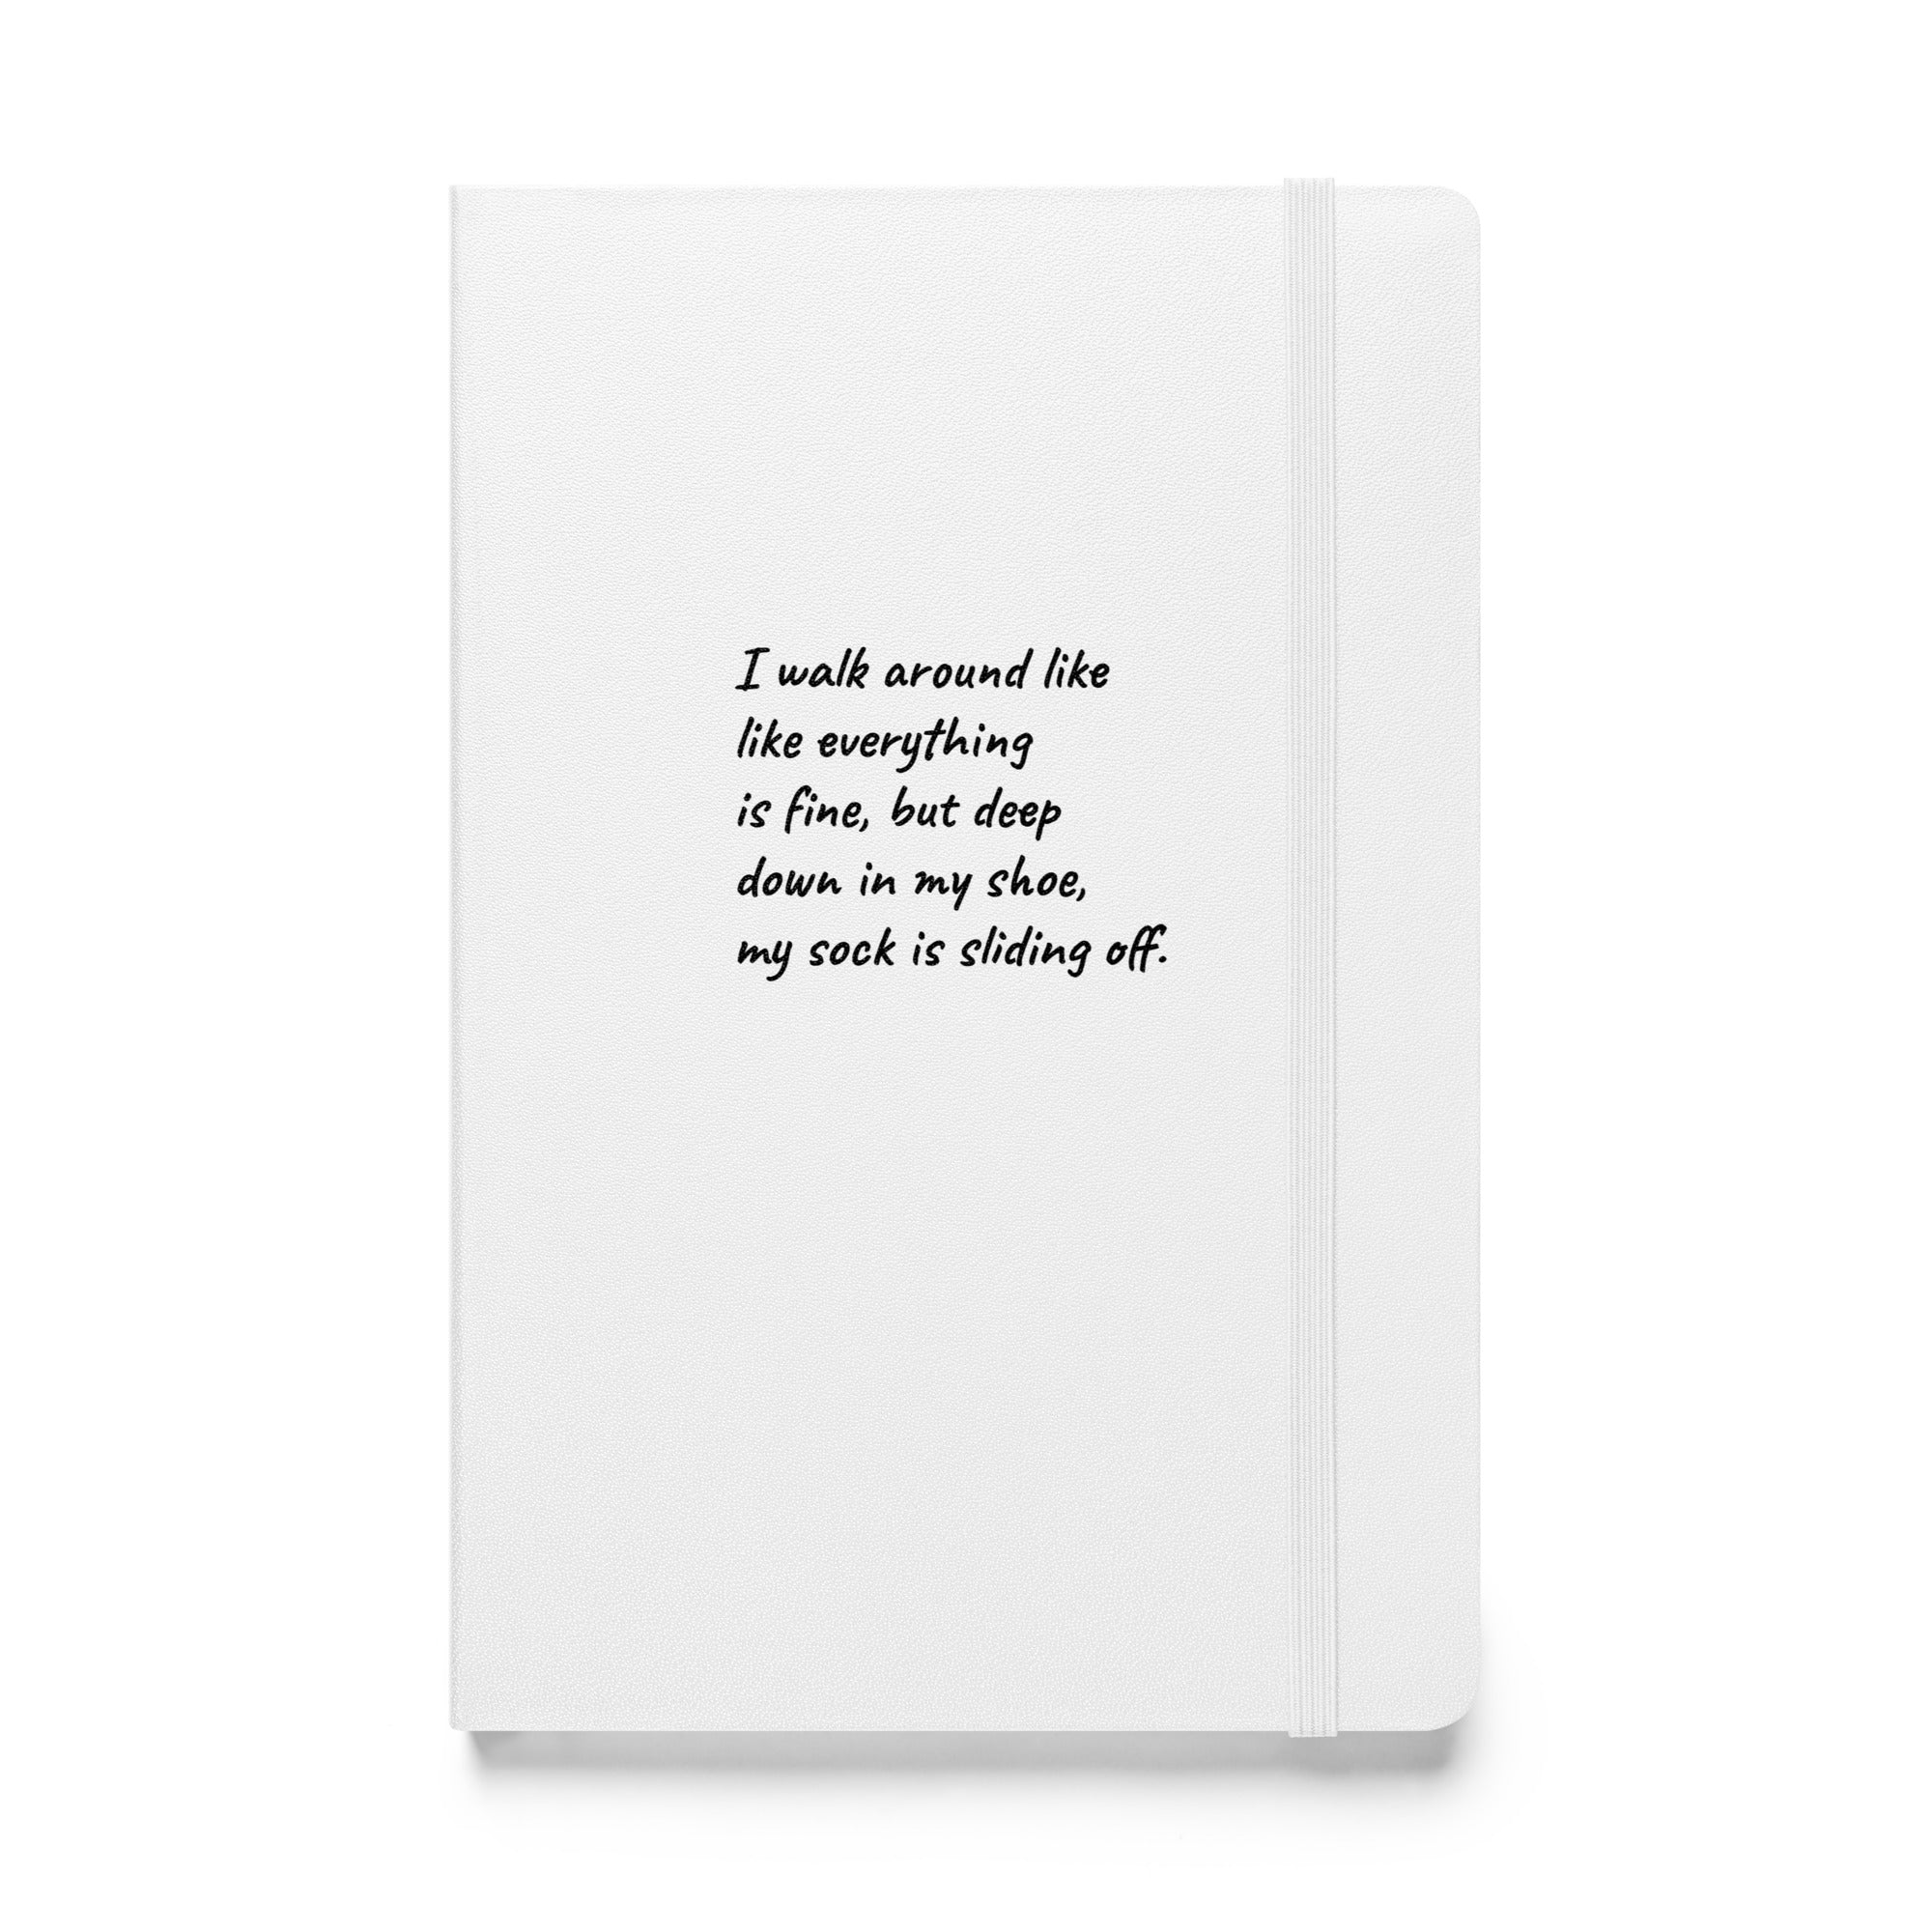 Everything is Fine - Hardcover Journal